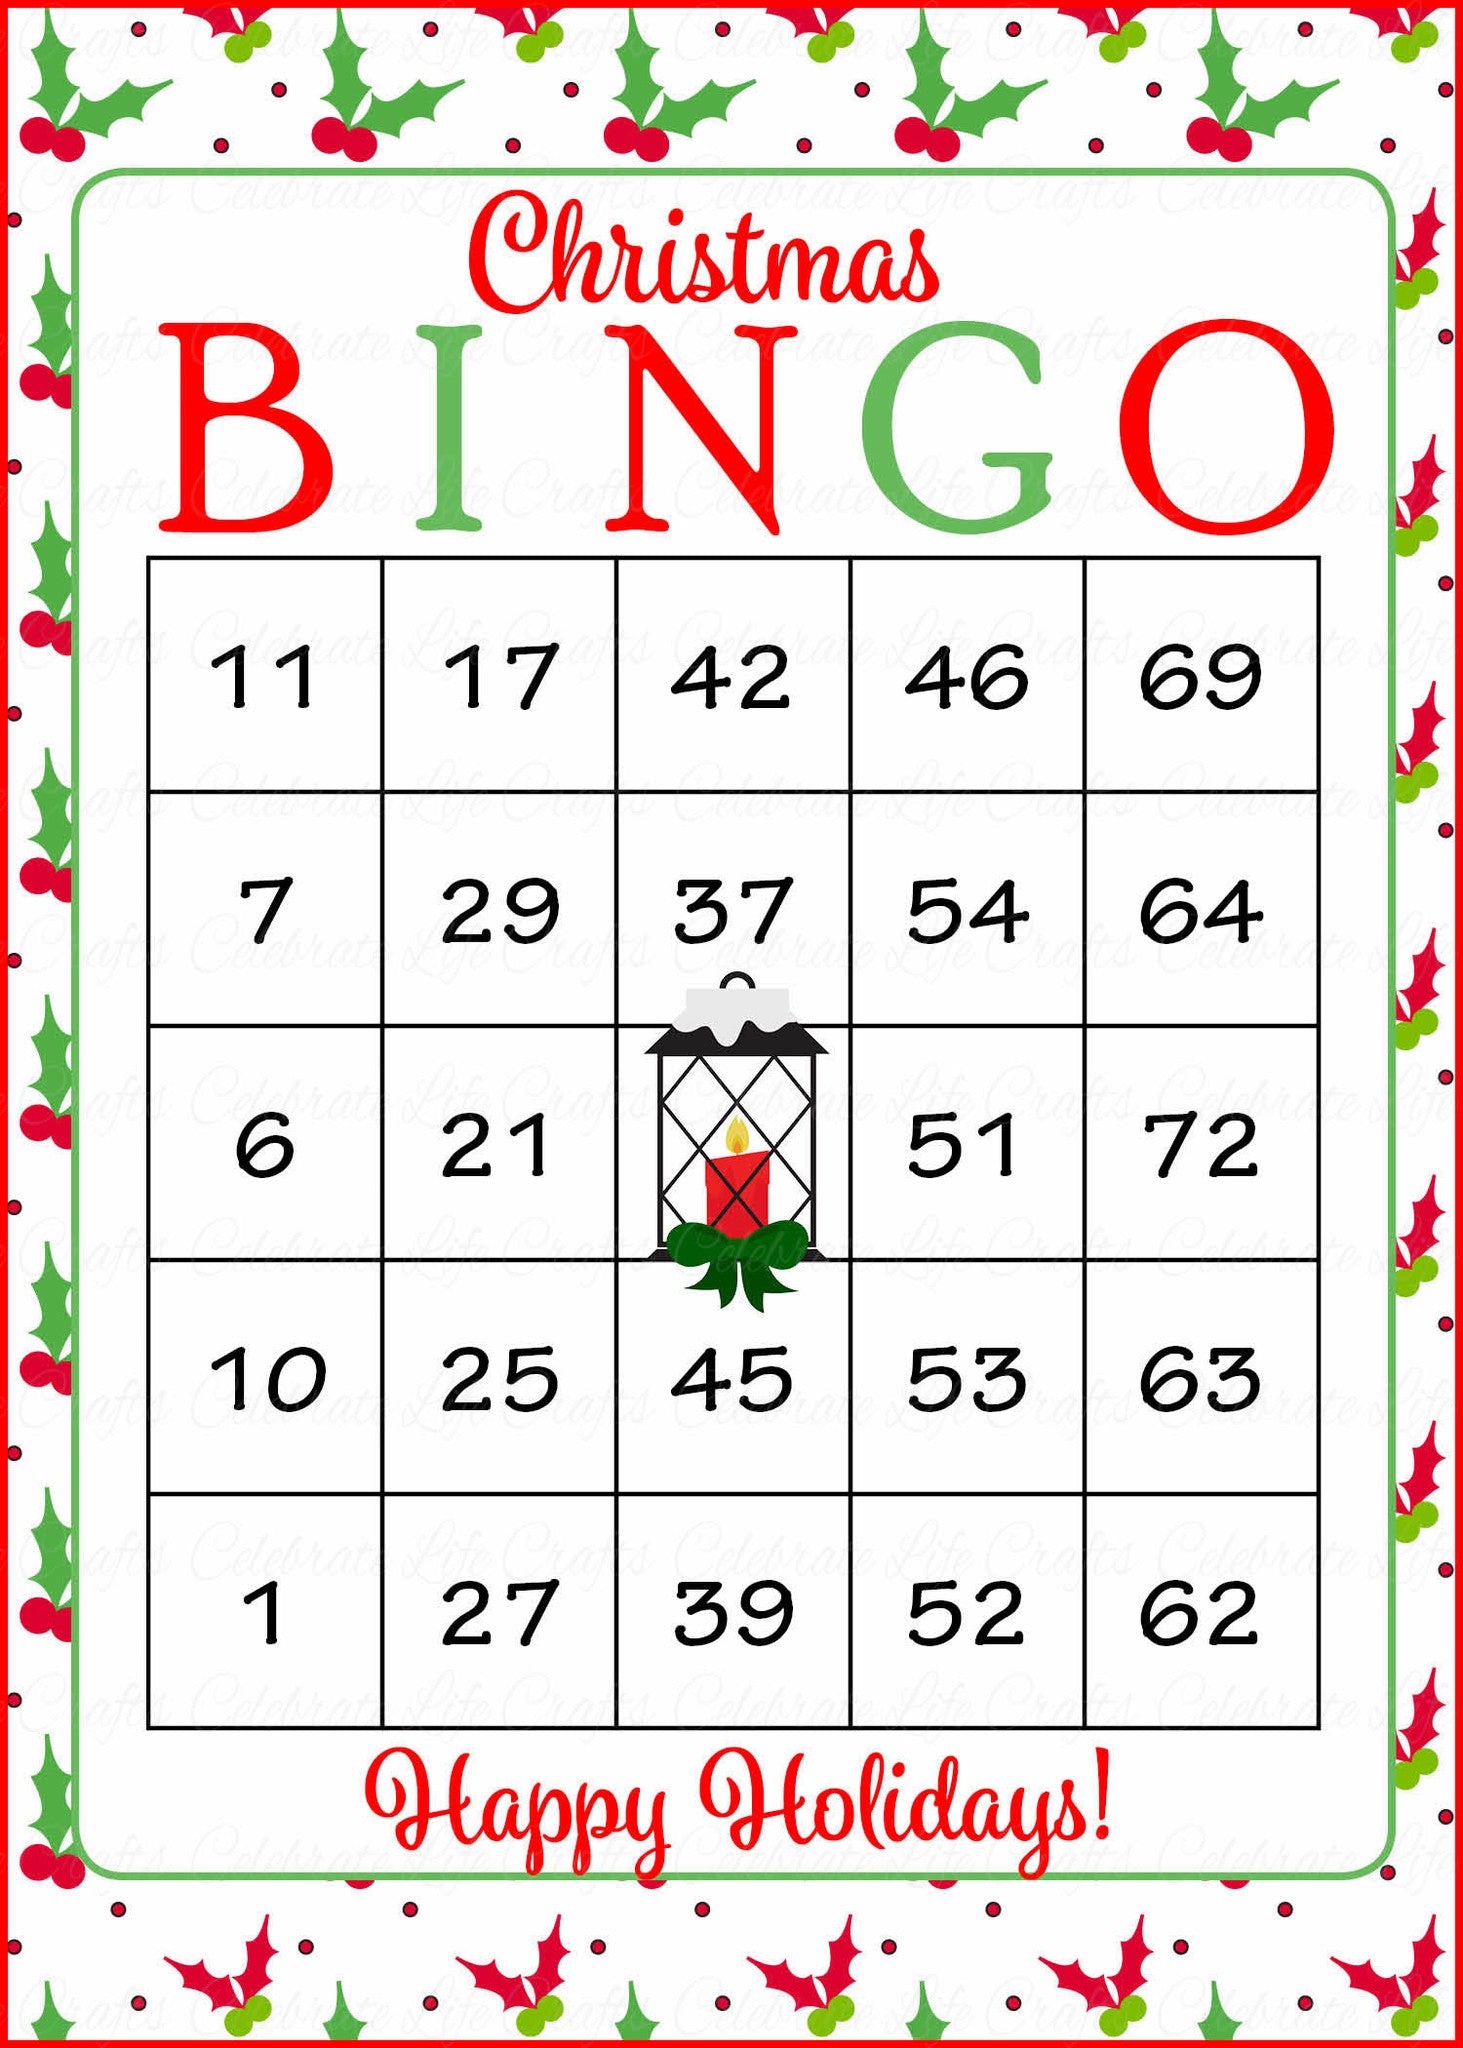 Christmas Bingo Game Download For Holiday Party Ideas Christmas Party 